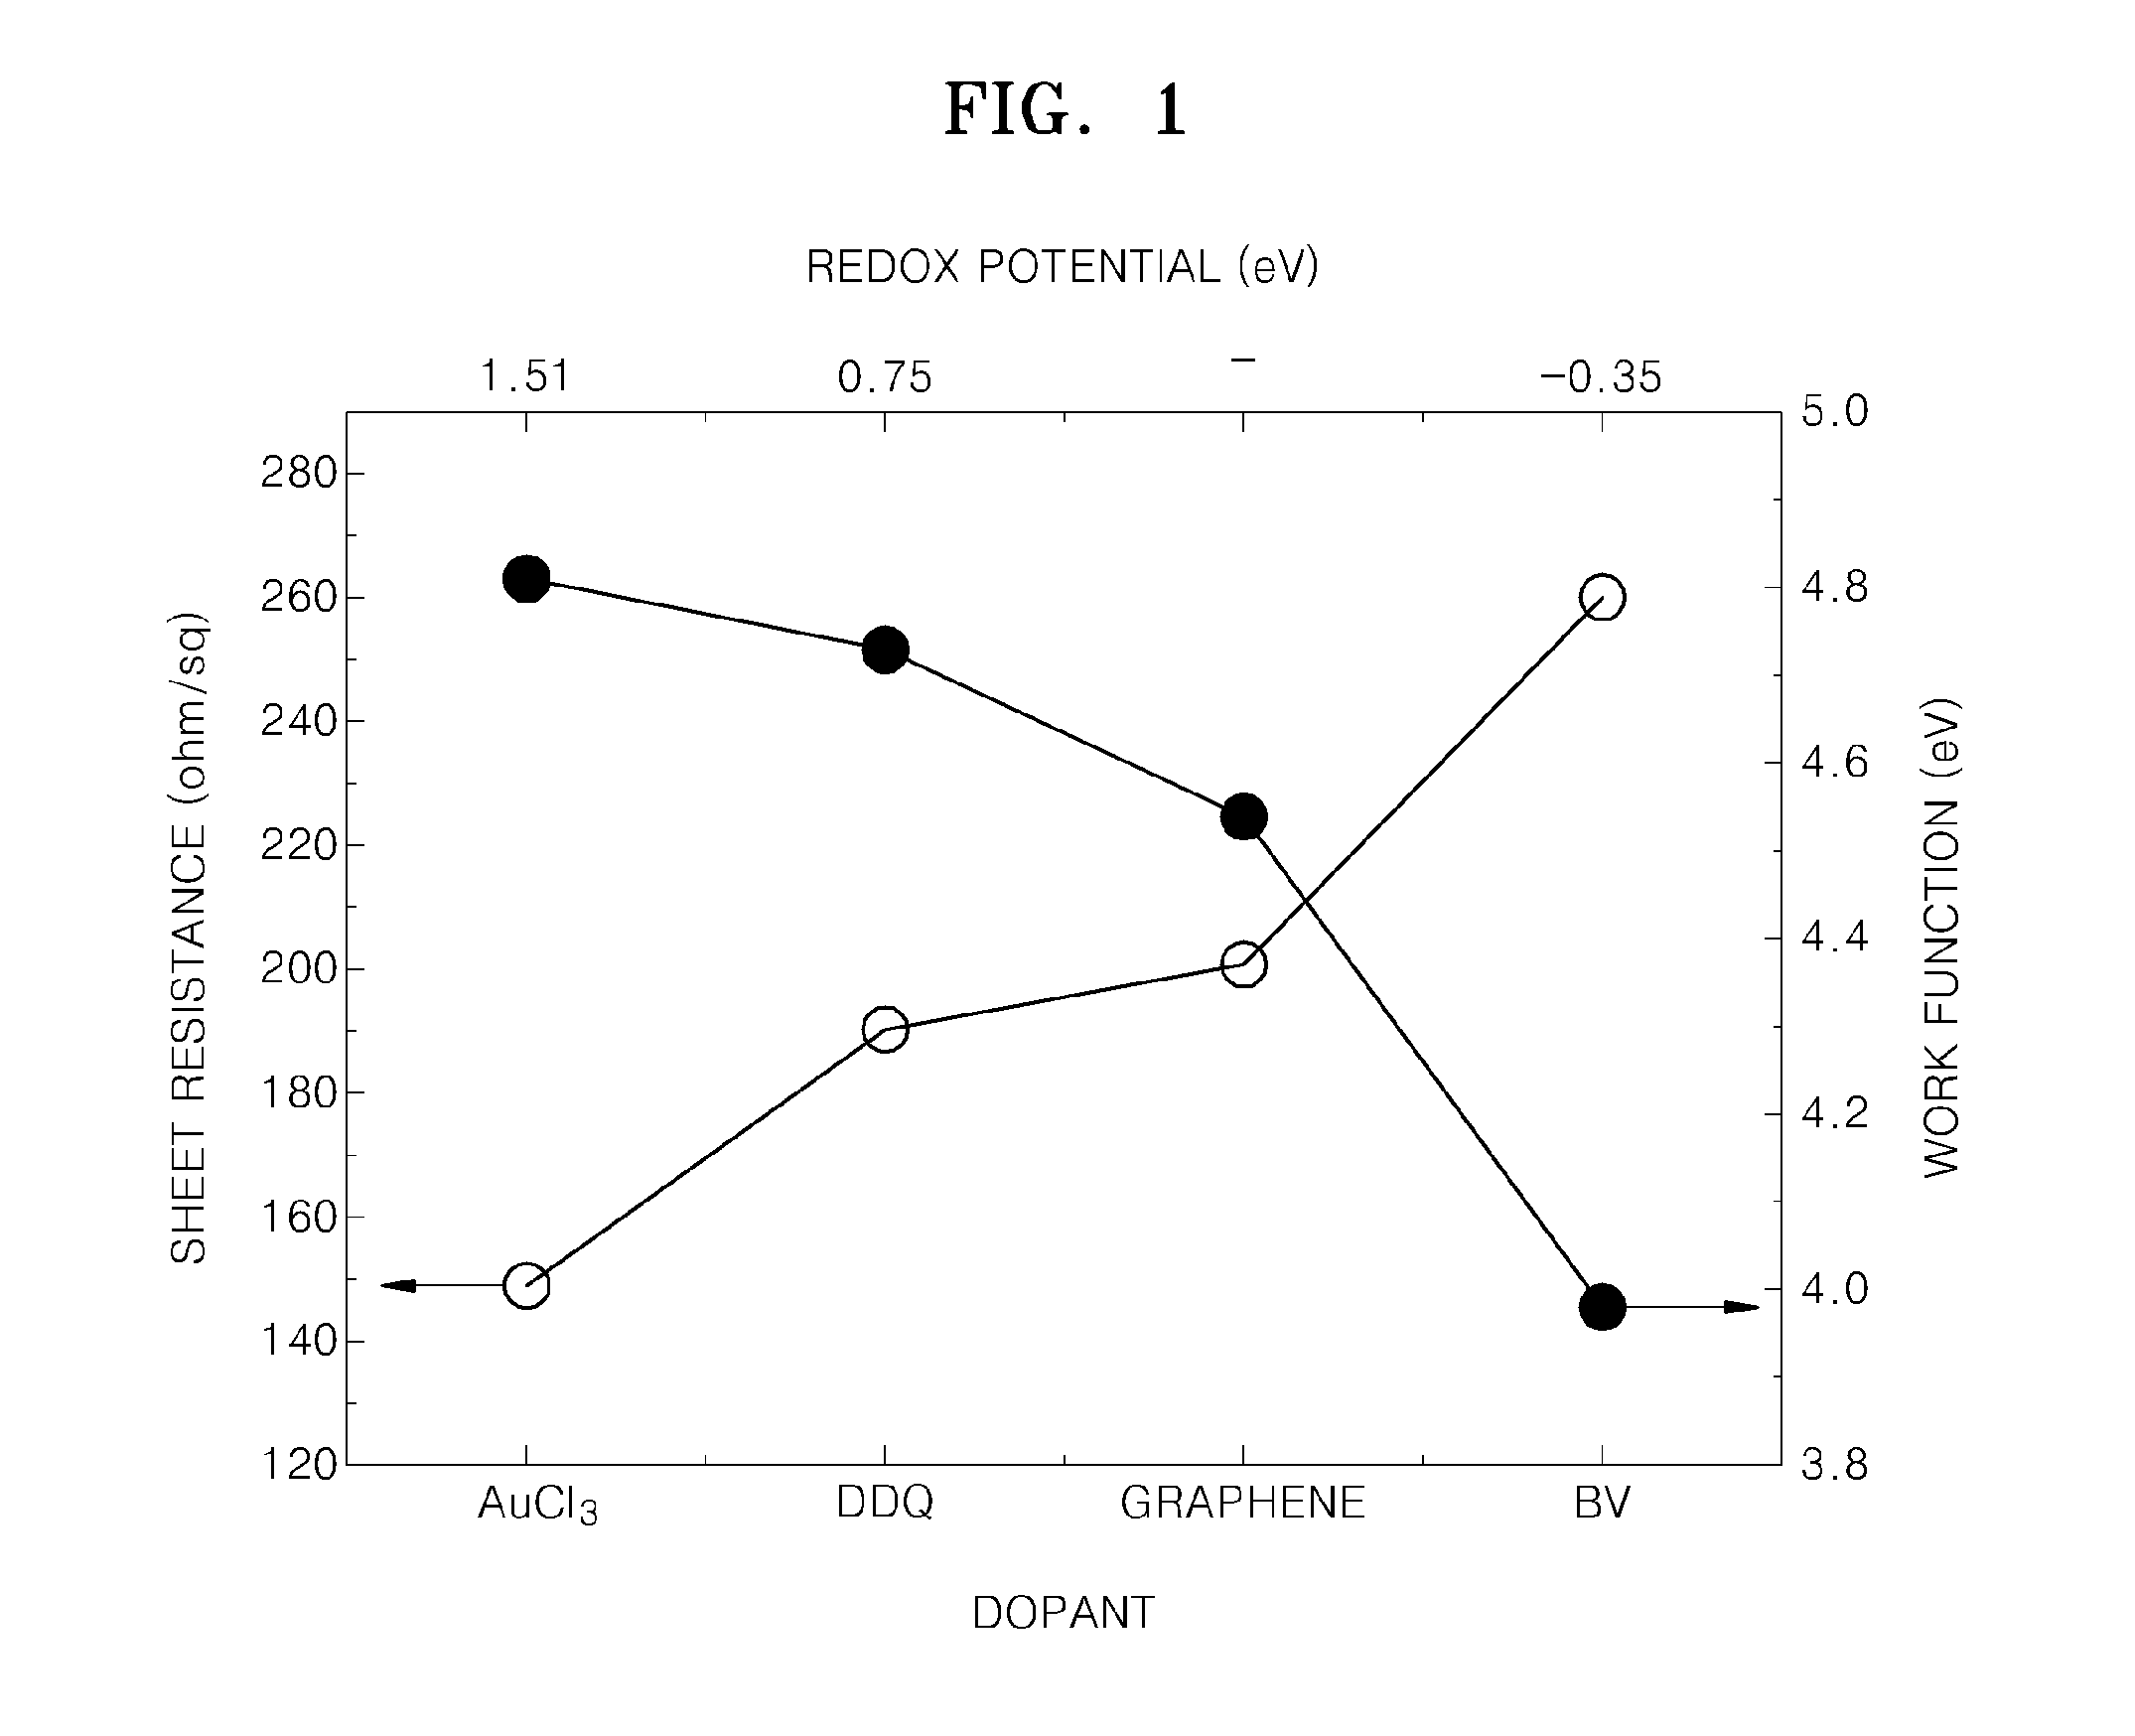 Doped graphene, method of manufacturing the doped graphene, and a device including the doped graphene